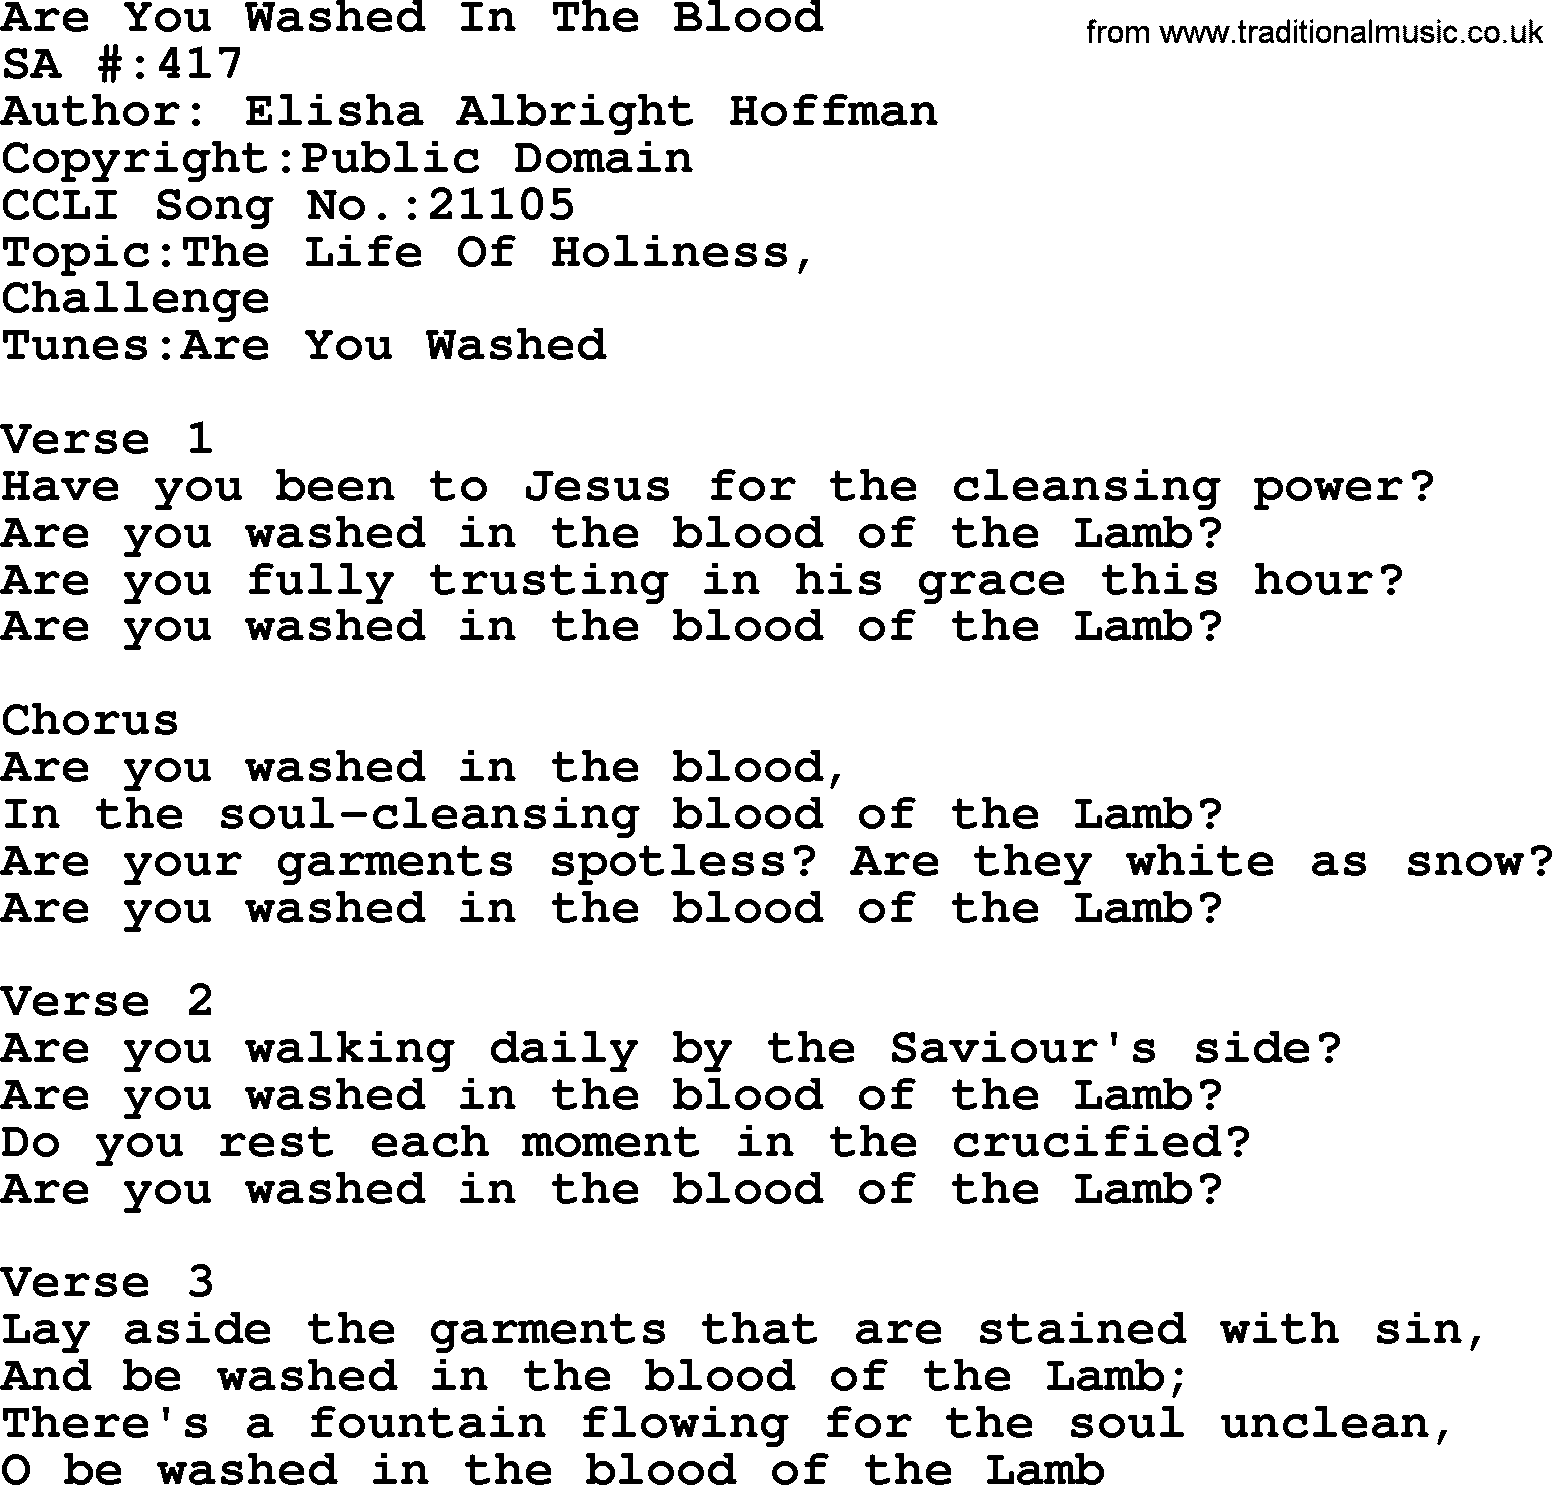 Salvation Army Hymnal, title: Are You Washed In The Blood, with lyrics and PDF,